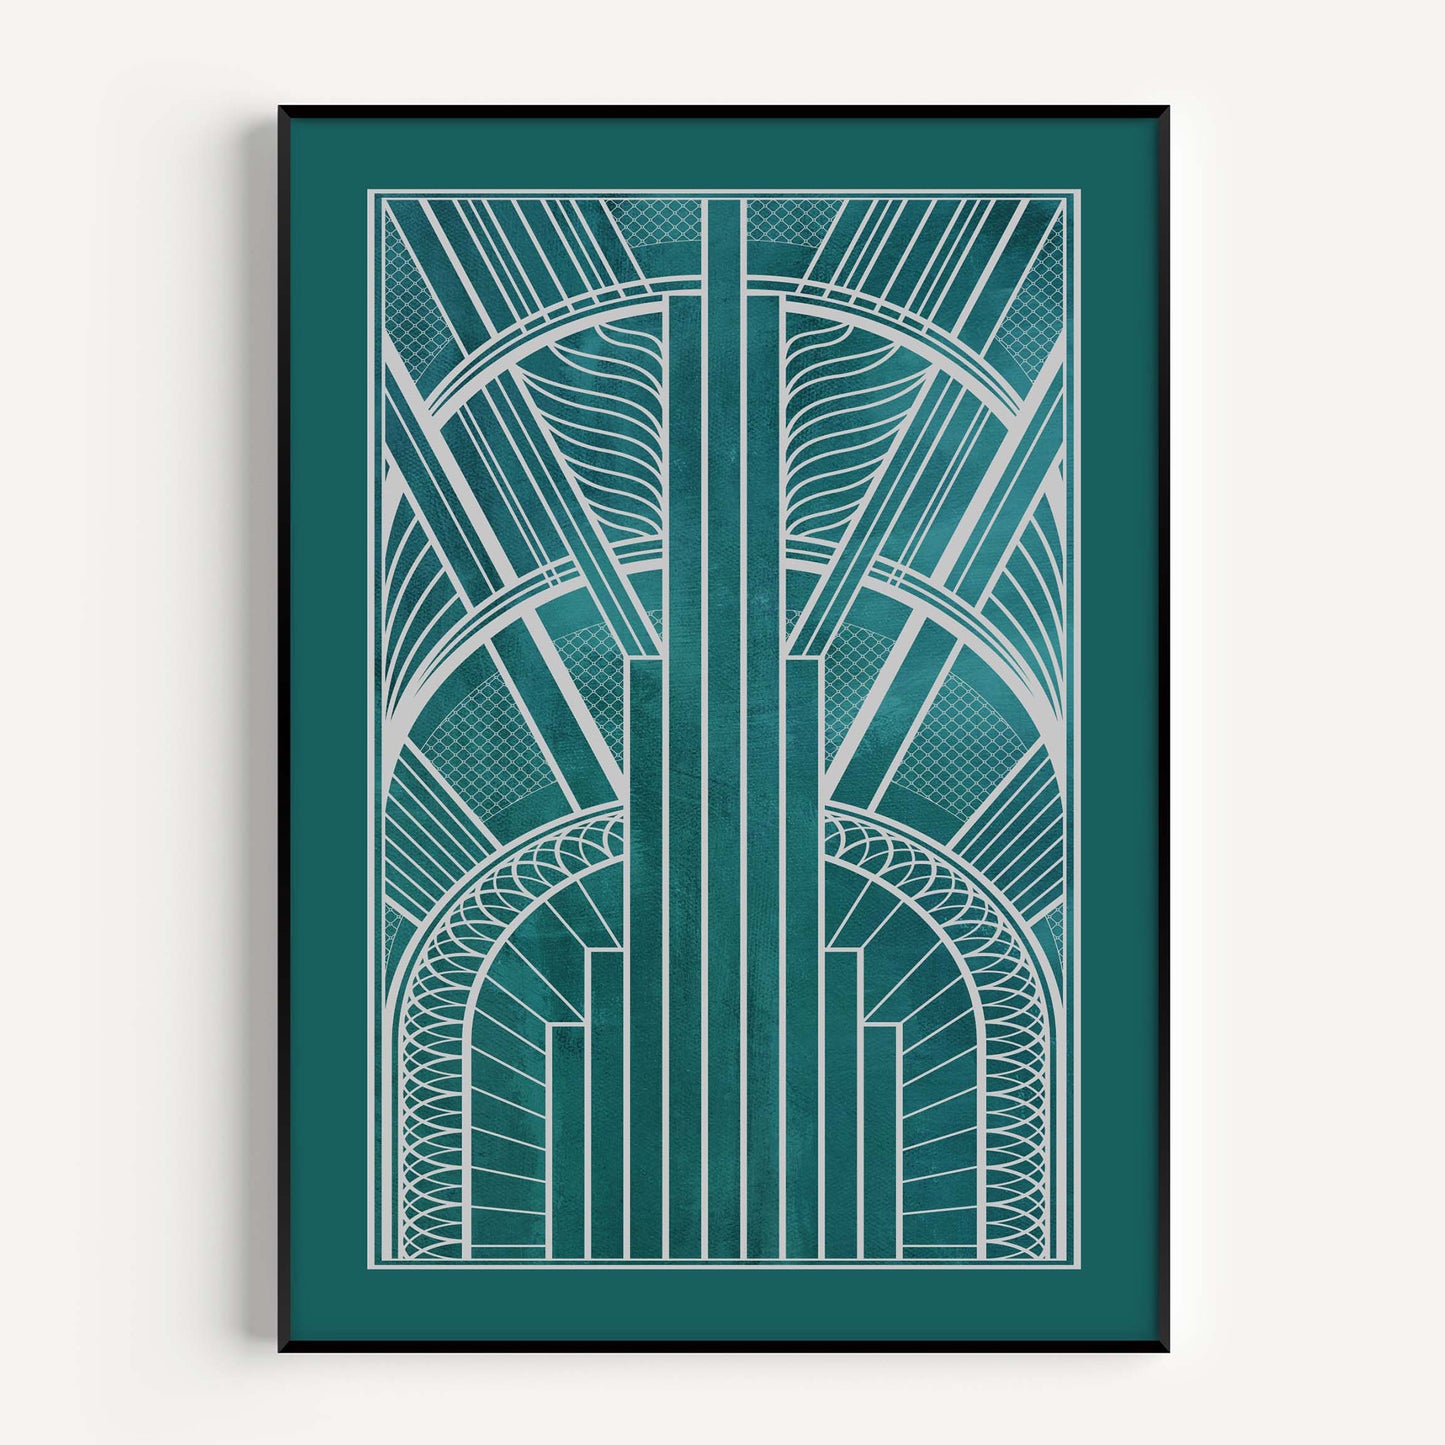 Teal art deco print with silver detail